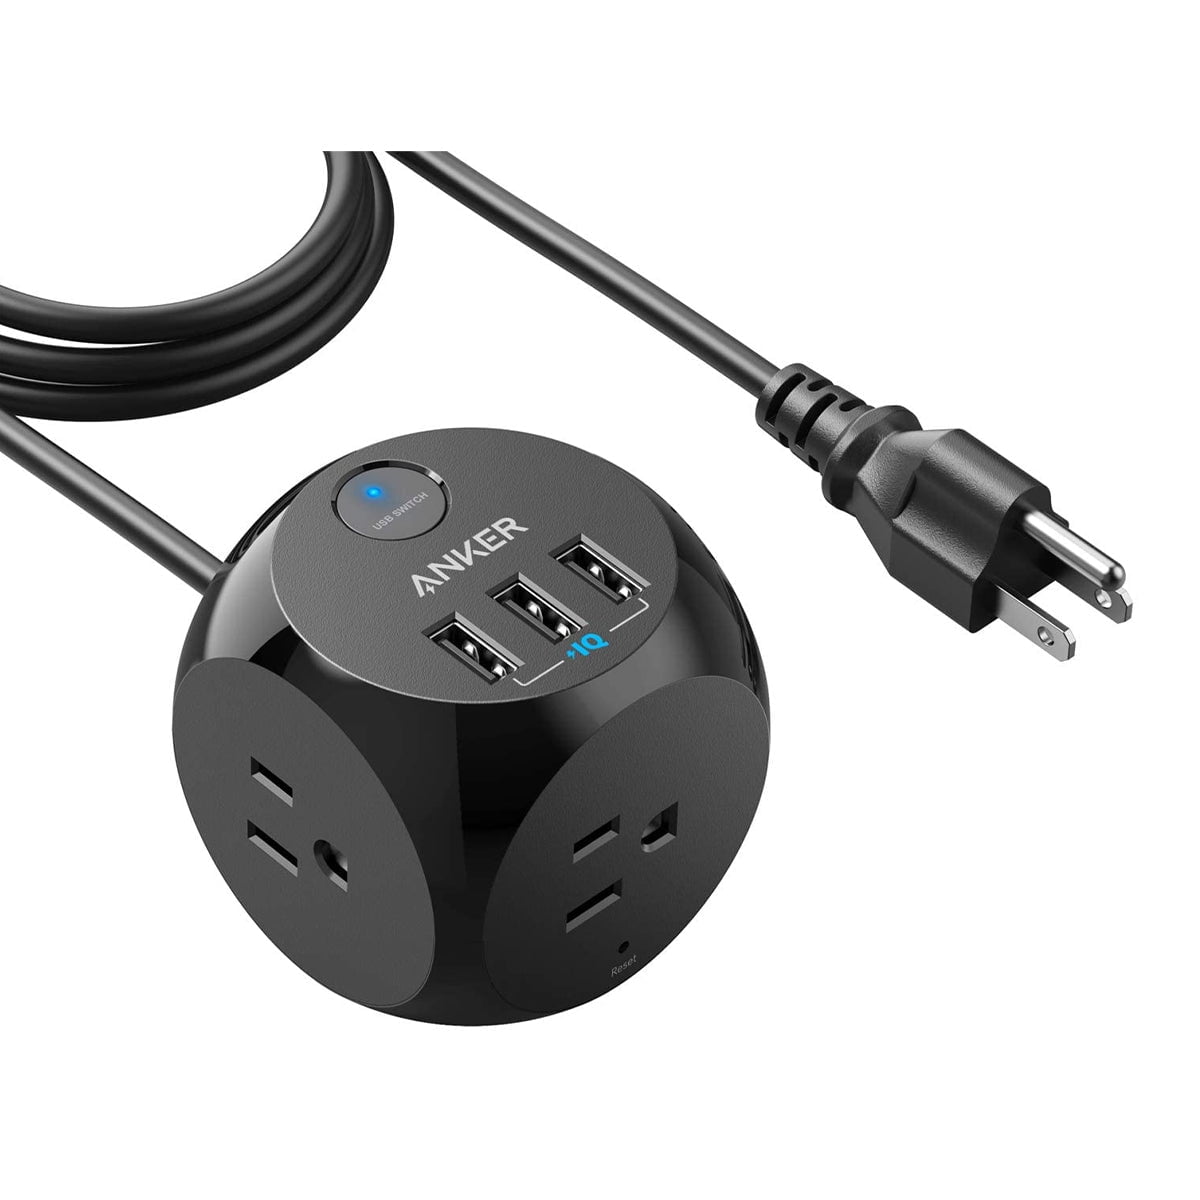 Vend om Grøn baggrund vask Anker Small Power Strip Surge Protector, 3 Outlets and 3 USB Ports for  Home, Office, and More Black - Walmart.com